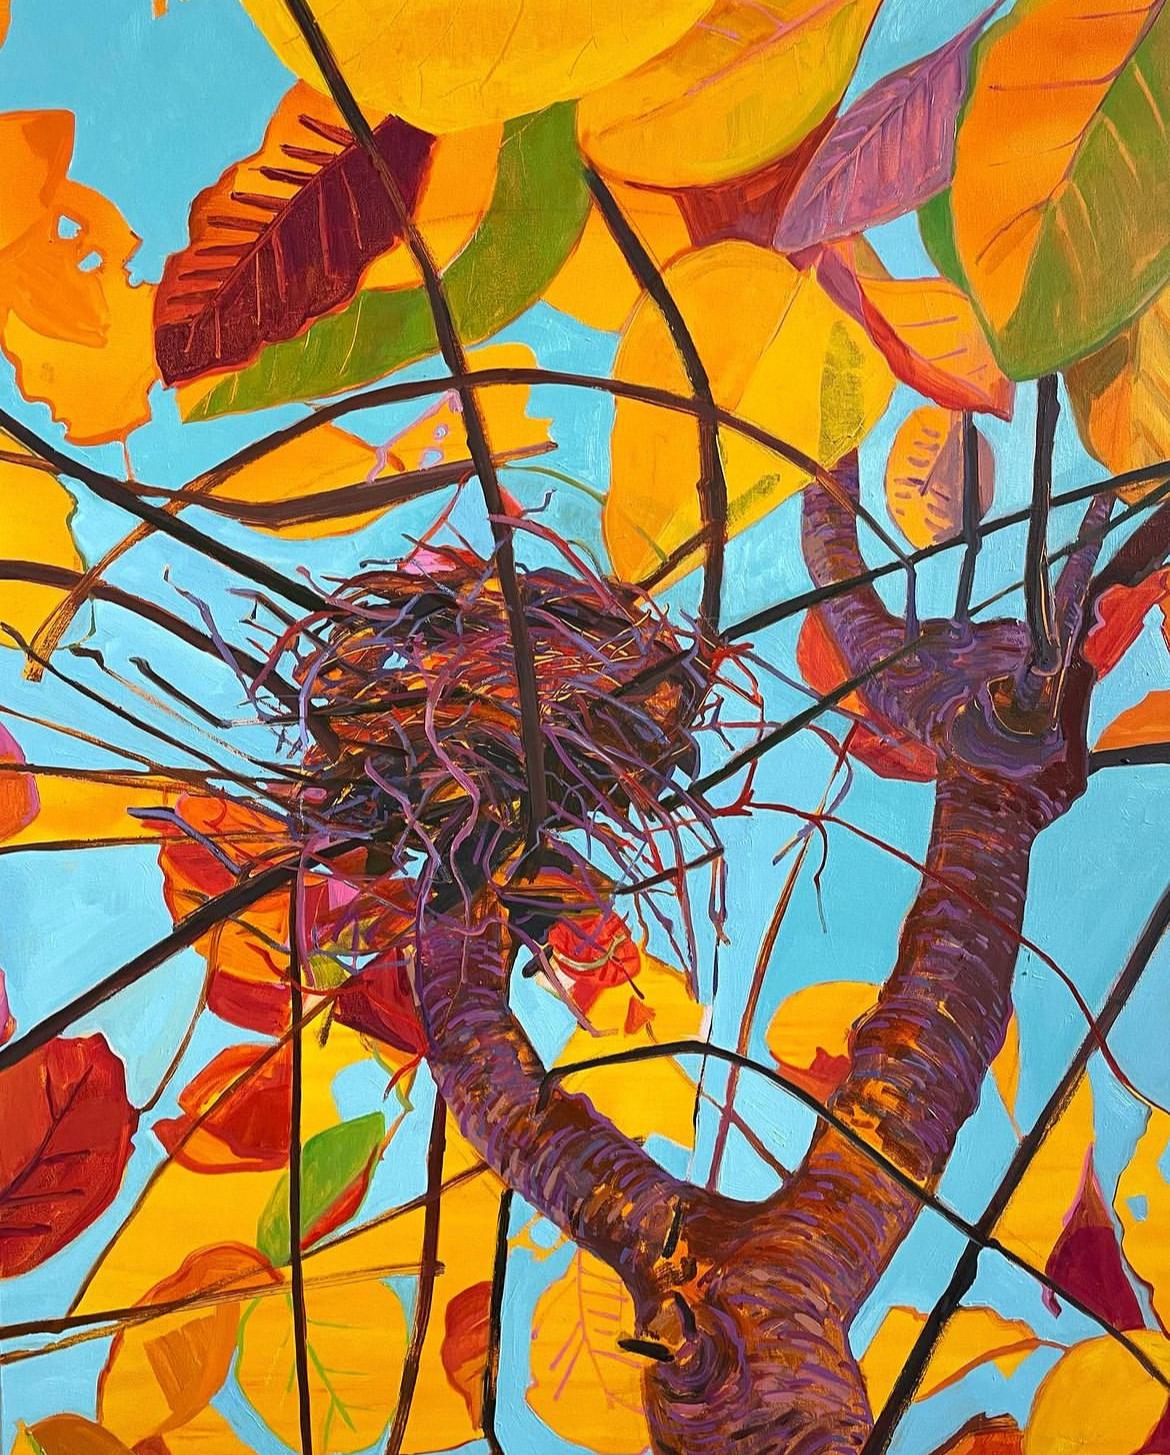 Deirdre Murphy Figurative Painting - Golden Hour: contemporary oil painting of  bird nest in tree, gold & red leaves